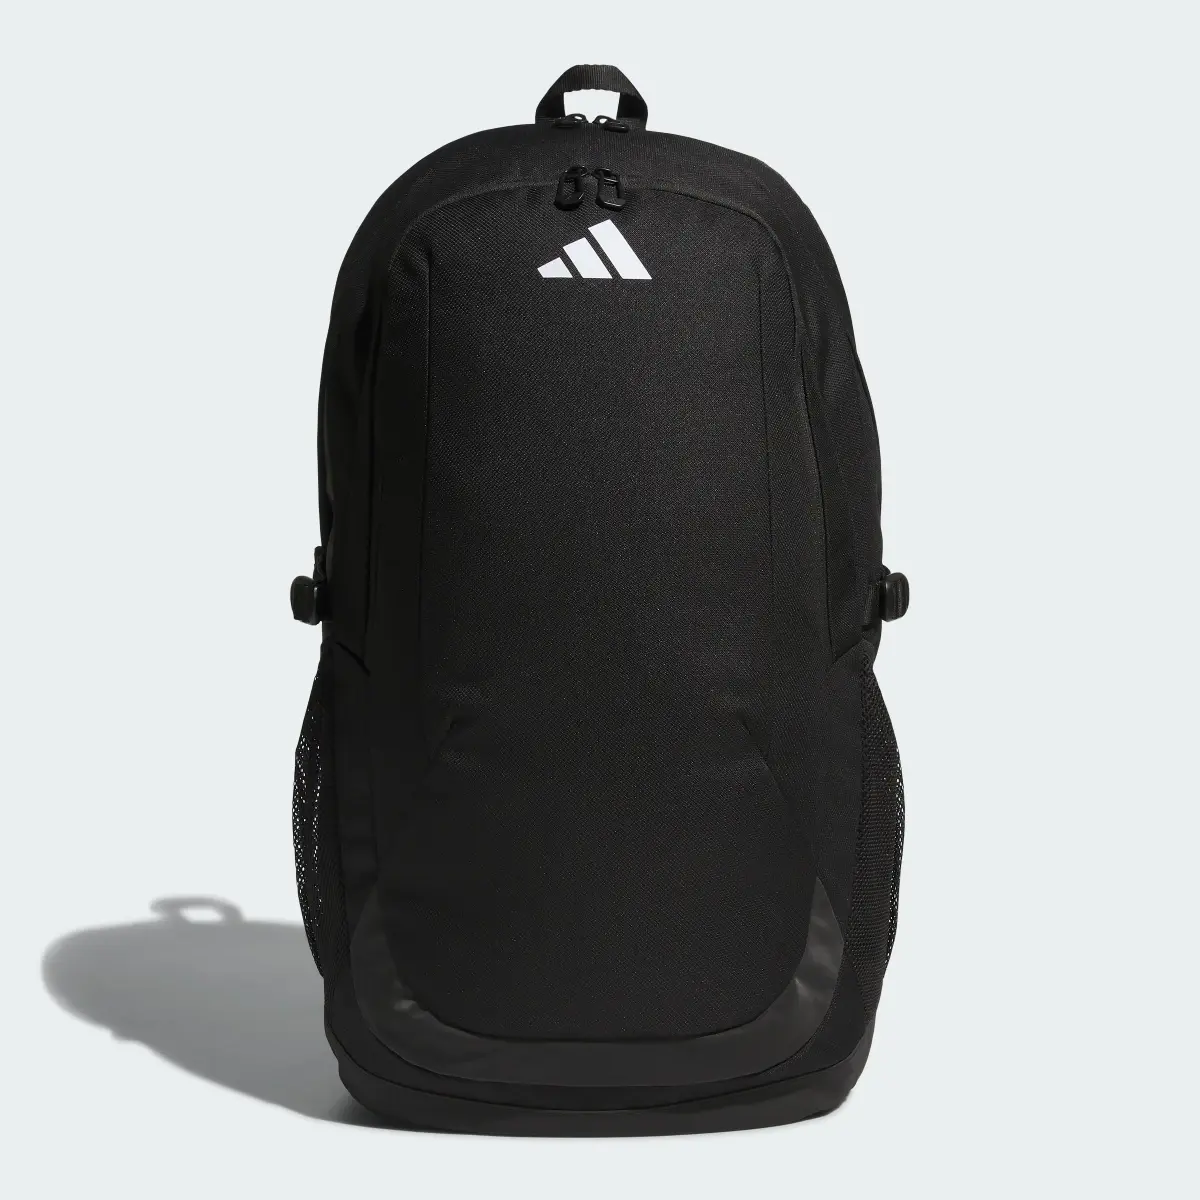 Adidas EP/Syst. Team Backpack 35 L. 2